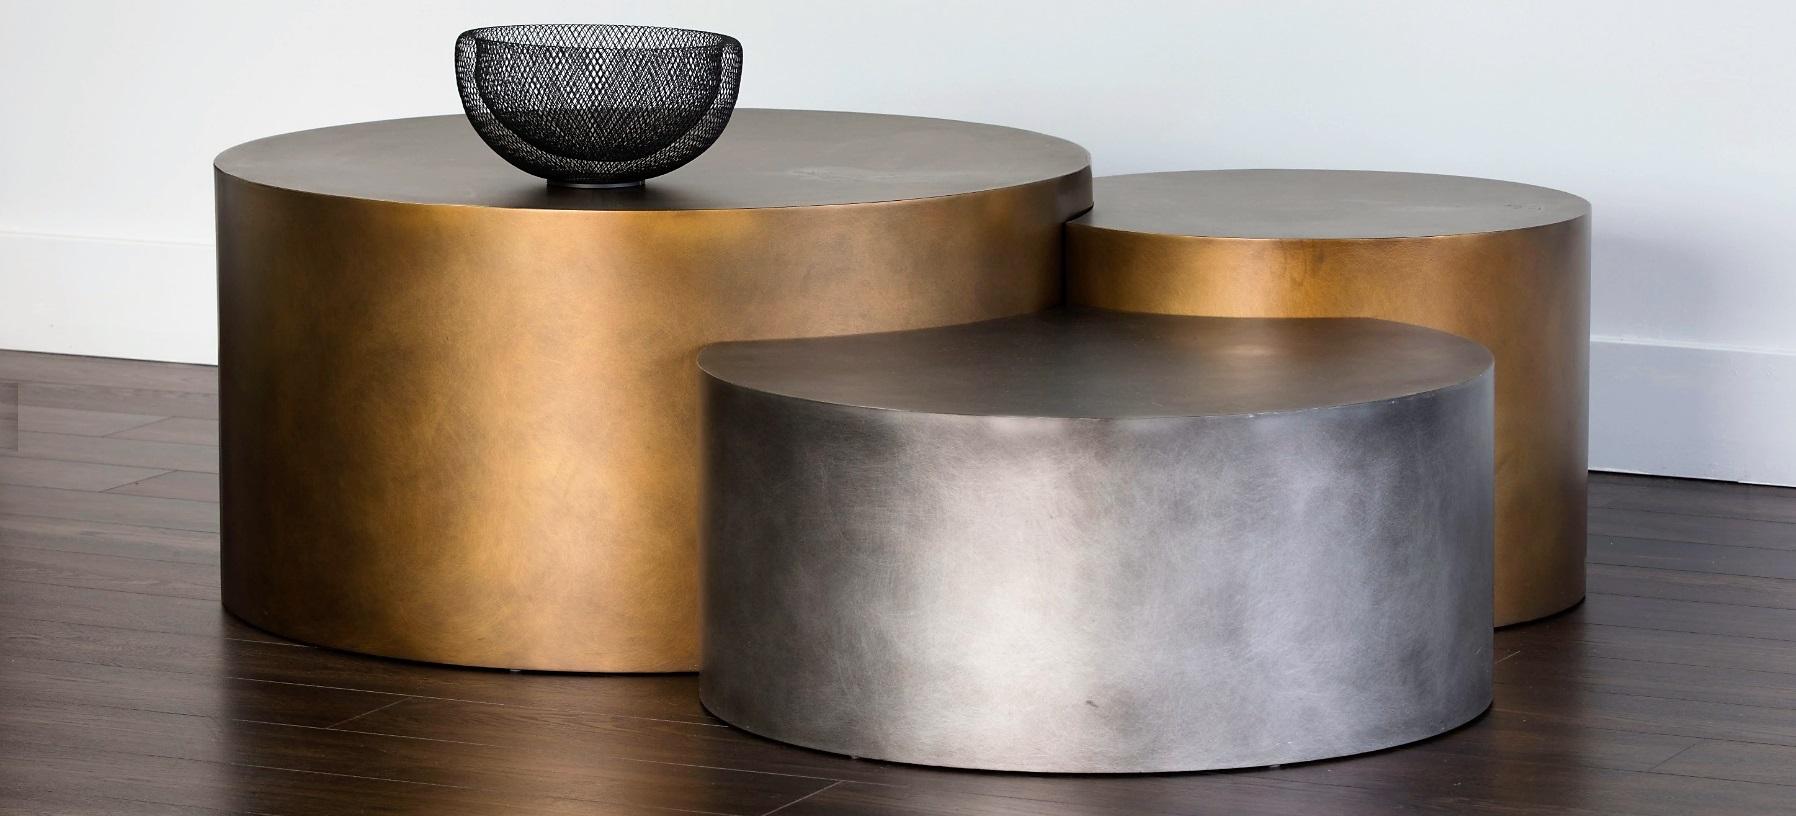 Modern Metallic Composition of Three Low Tables in Different Heights and Finishes